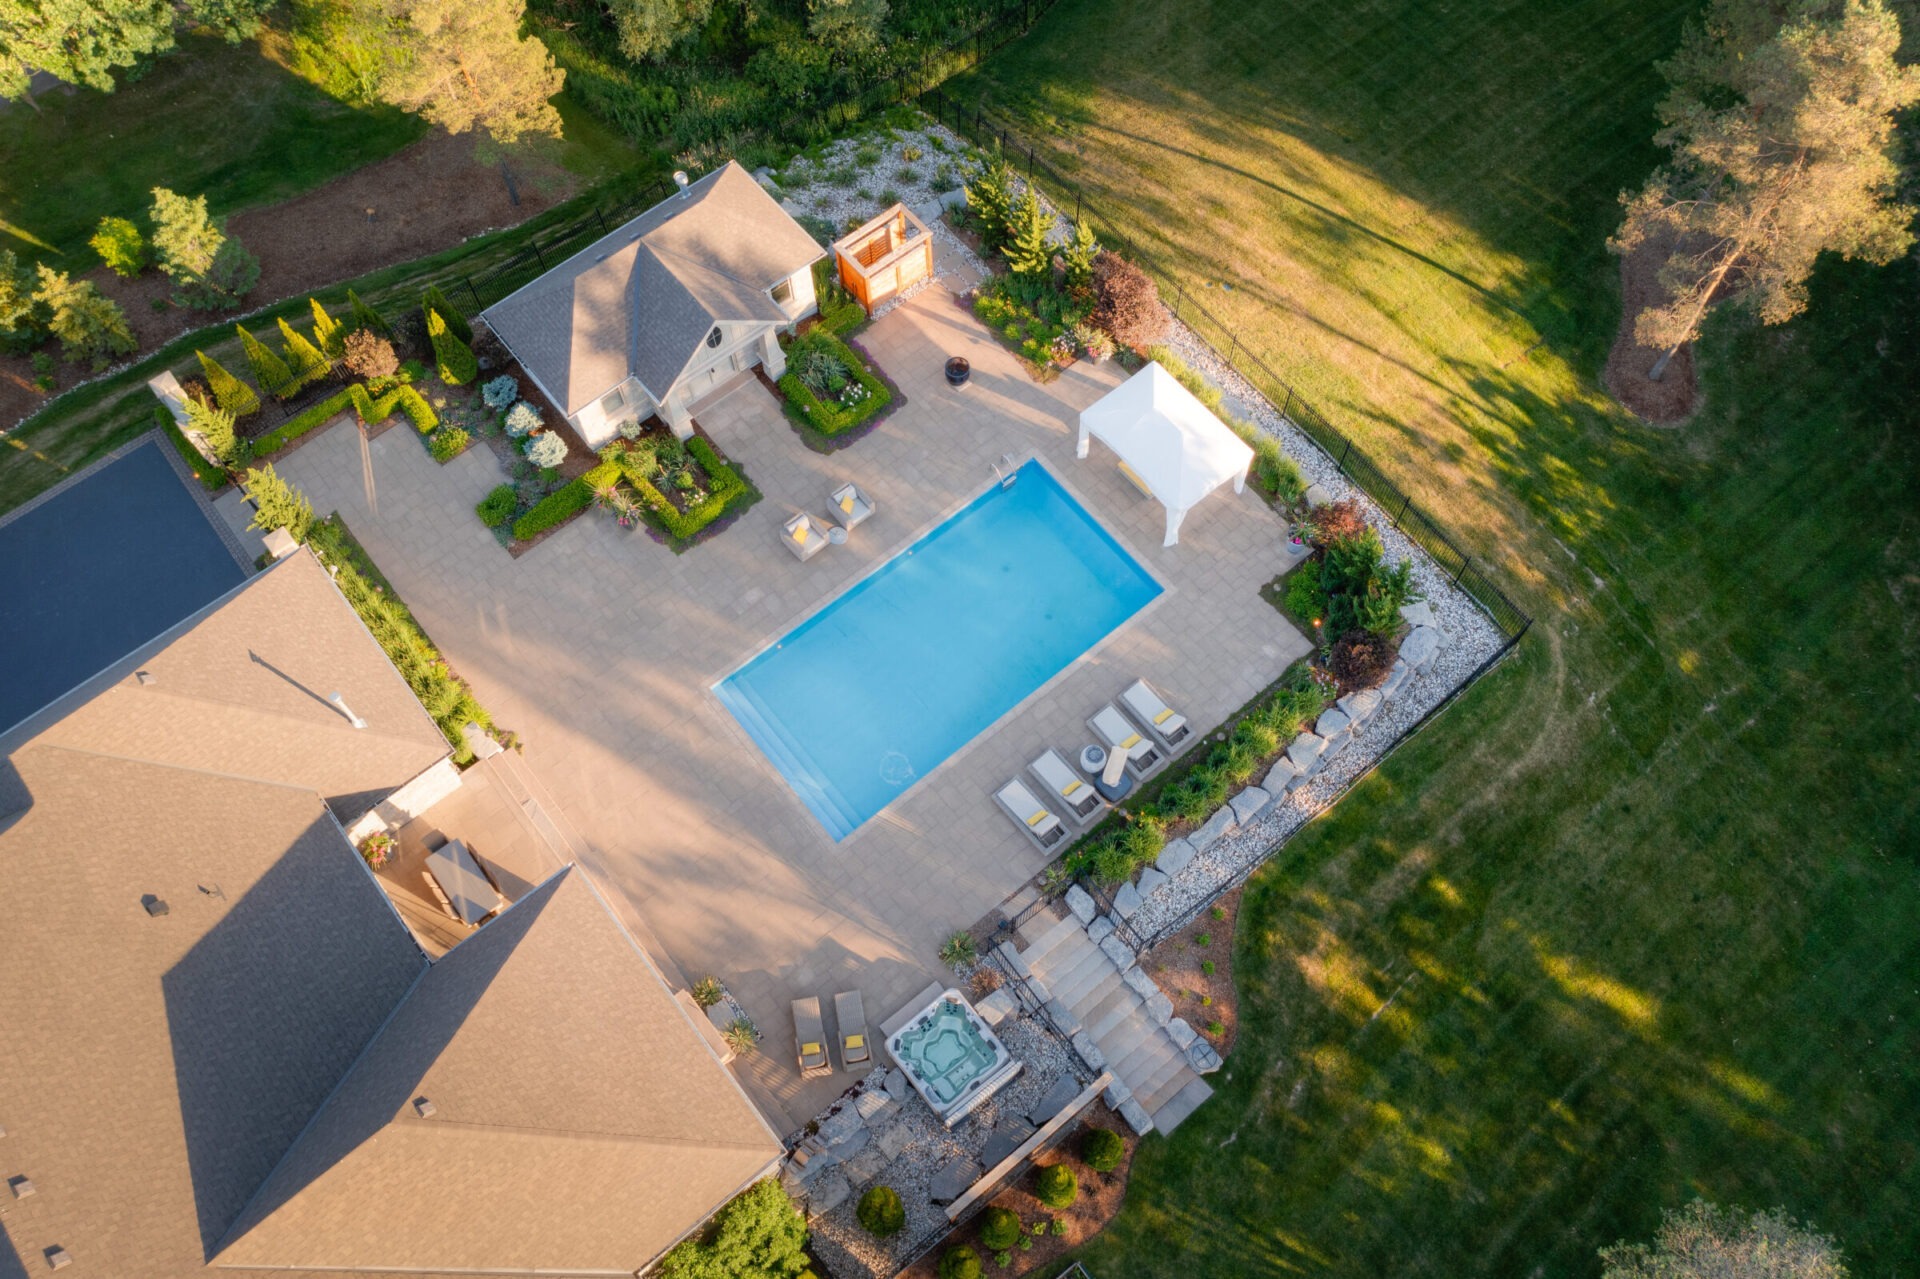 An aerial view of a residential backyard with a large swimming pool, hot tub, landscaped garden, patio area, and a spacious lawn.